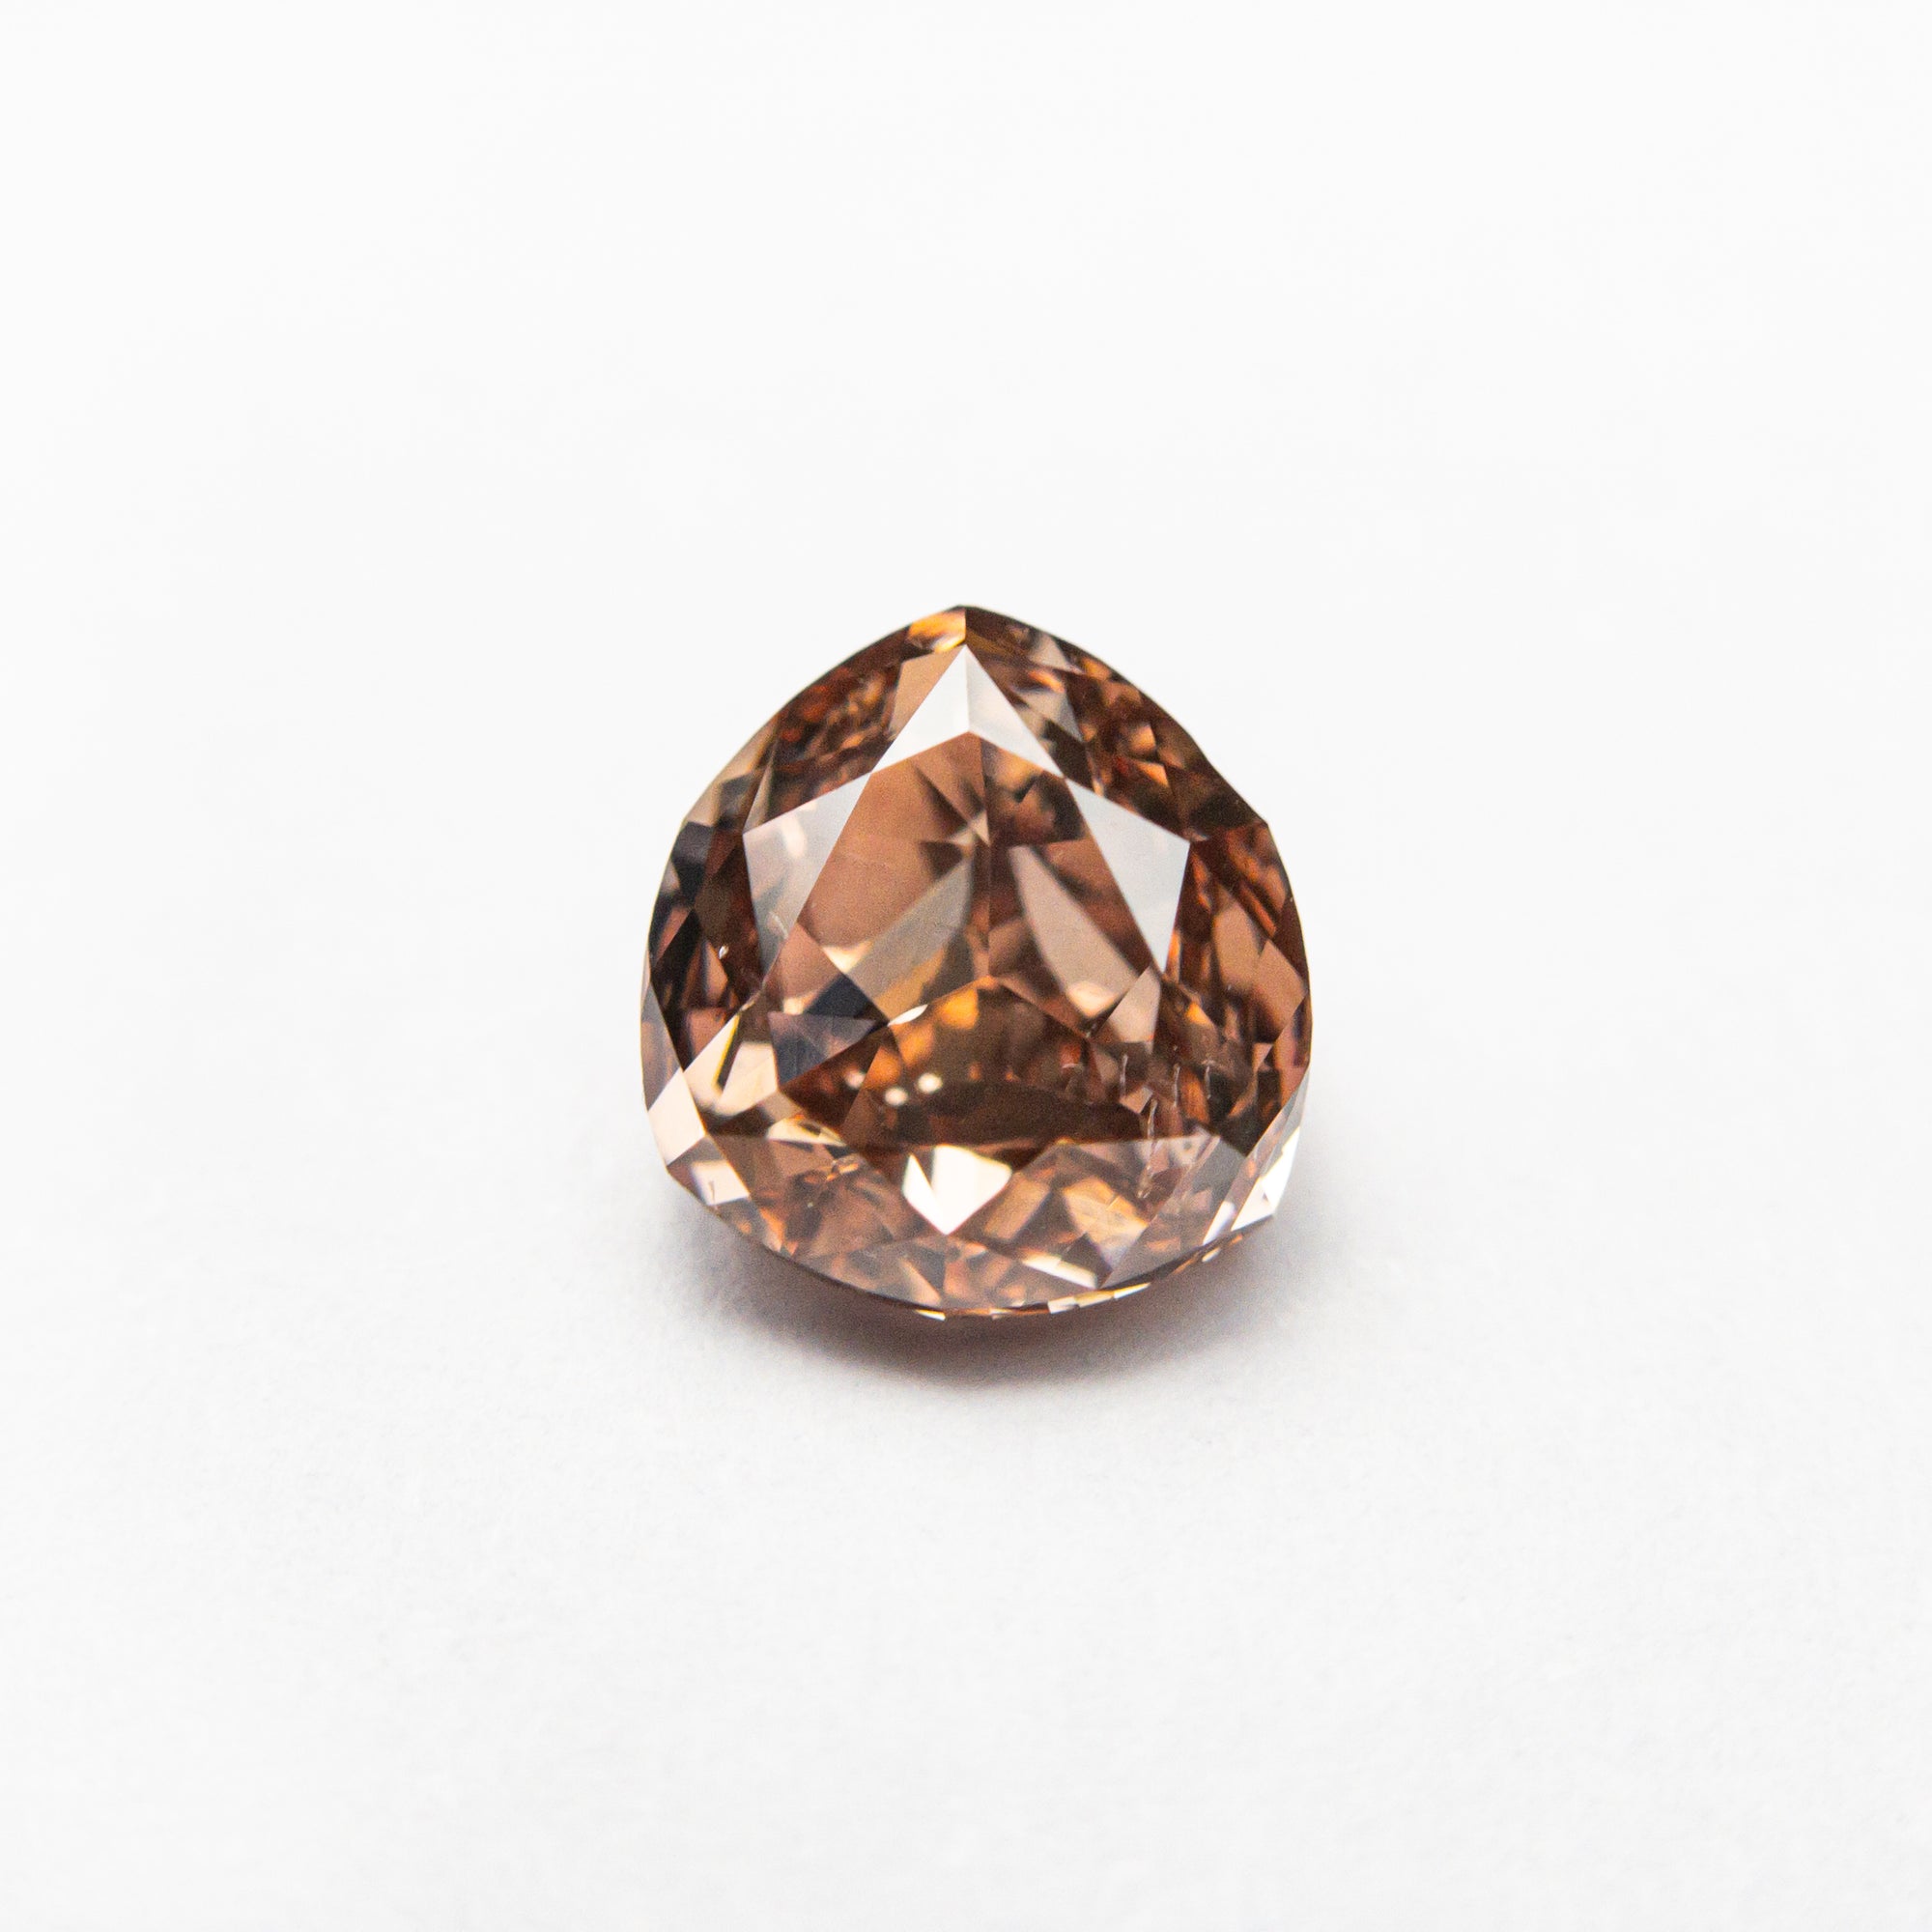 1.00ct 6.08x5.67x3.42mm GIA SI1 Fancy Brown-Pink Trillion Brilliant 🇦🇺 24113-01